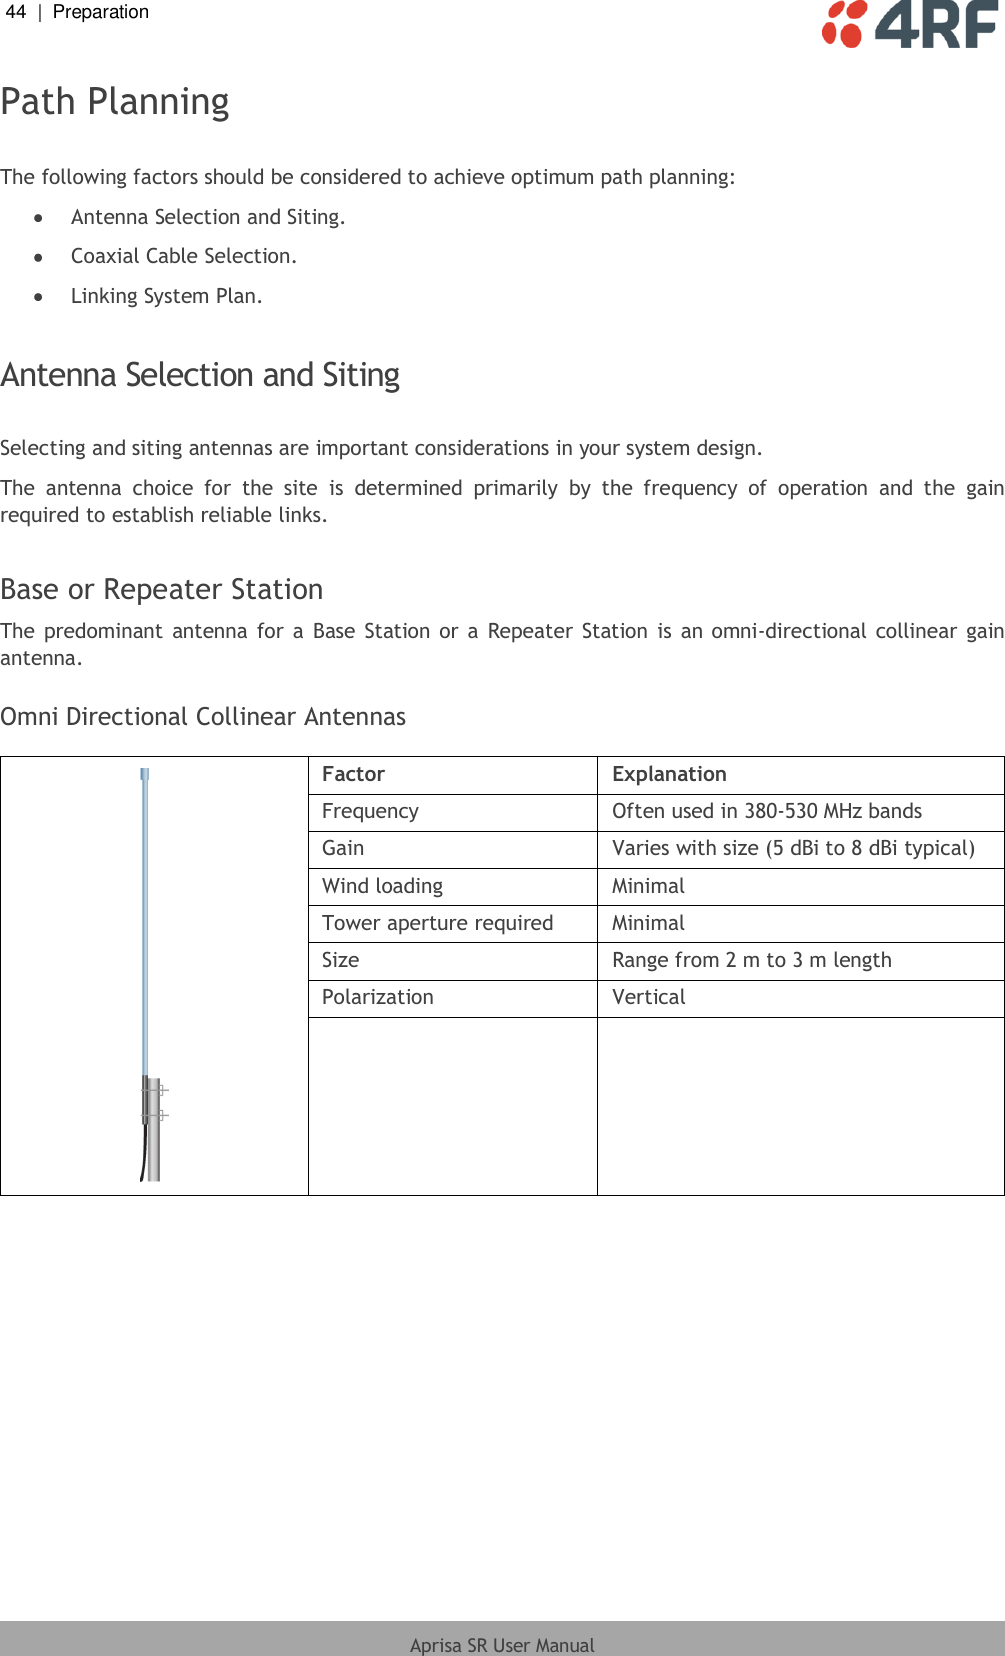 44  |  Preparation   Aprisa SR User Manual  Path Planning  The following factors should be considered to achieve optimum path planning:  Antenna Selection and Siting.  Coaxial Cable Selection.  Linking System Plan.  Antenna Selection and Siting  Selecting and siting antennas are important considerations in your system design. The  antenna  choice  for  the  site  is  determined  primarily  by  the  frequency  of  operation  and  the  gain required to establish reliable links.  Base or Repeater Station The predominant antenna for  a  Base Station or a  Repeater Station is  an omni-directional collinear gain antenna.  Omni Directional Collinear Antennas   Factor Explanation Frequency Often used in 380-530 MHz bands Gain Varies with size (5 dBi to 8 dBi typical) Wind loading Minimal Tower aperture required Minimal Size Range from 2 m to 3 m length Polarization Vertical    